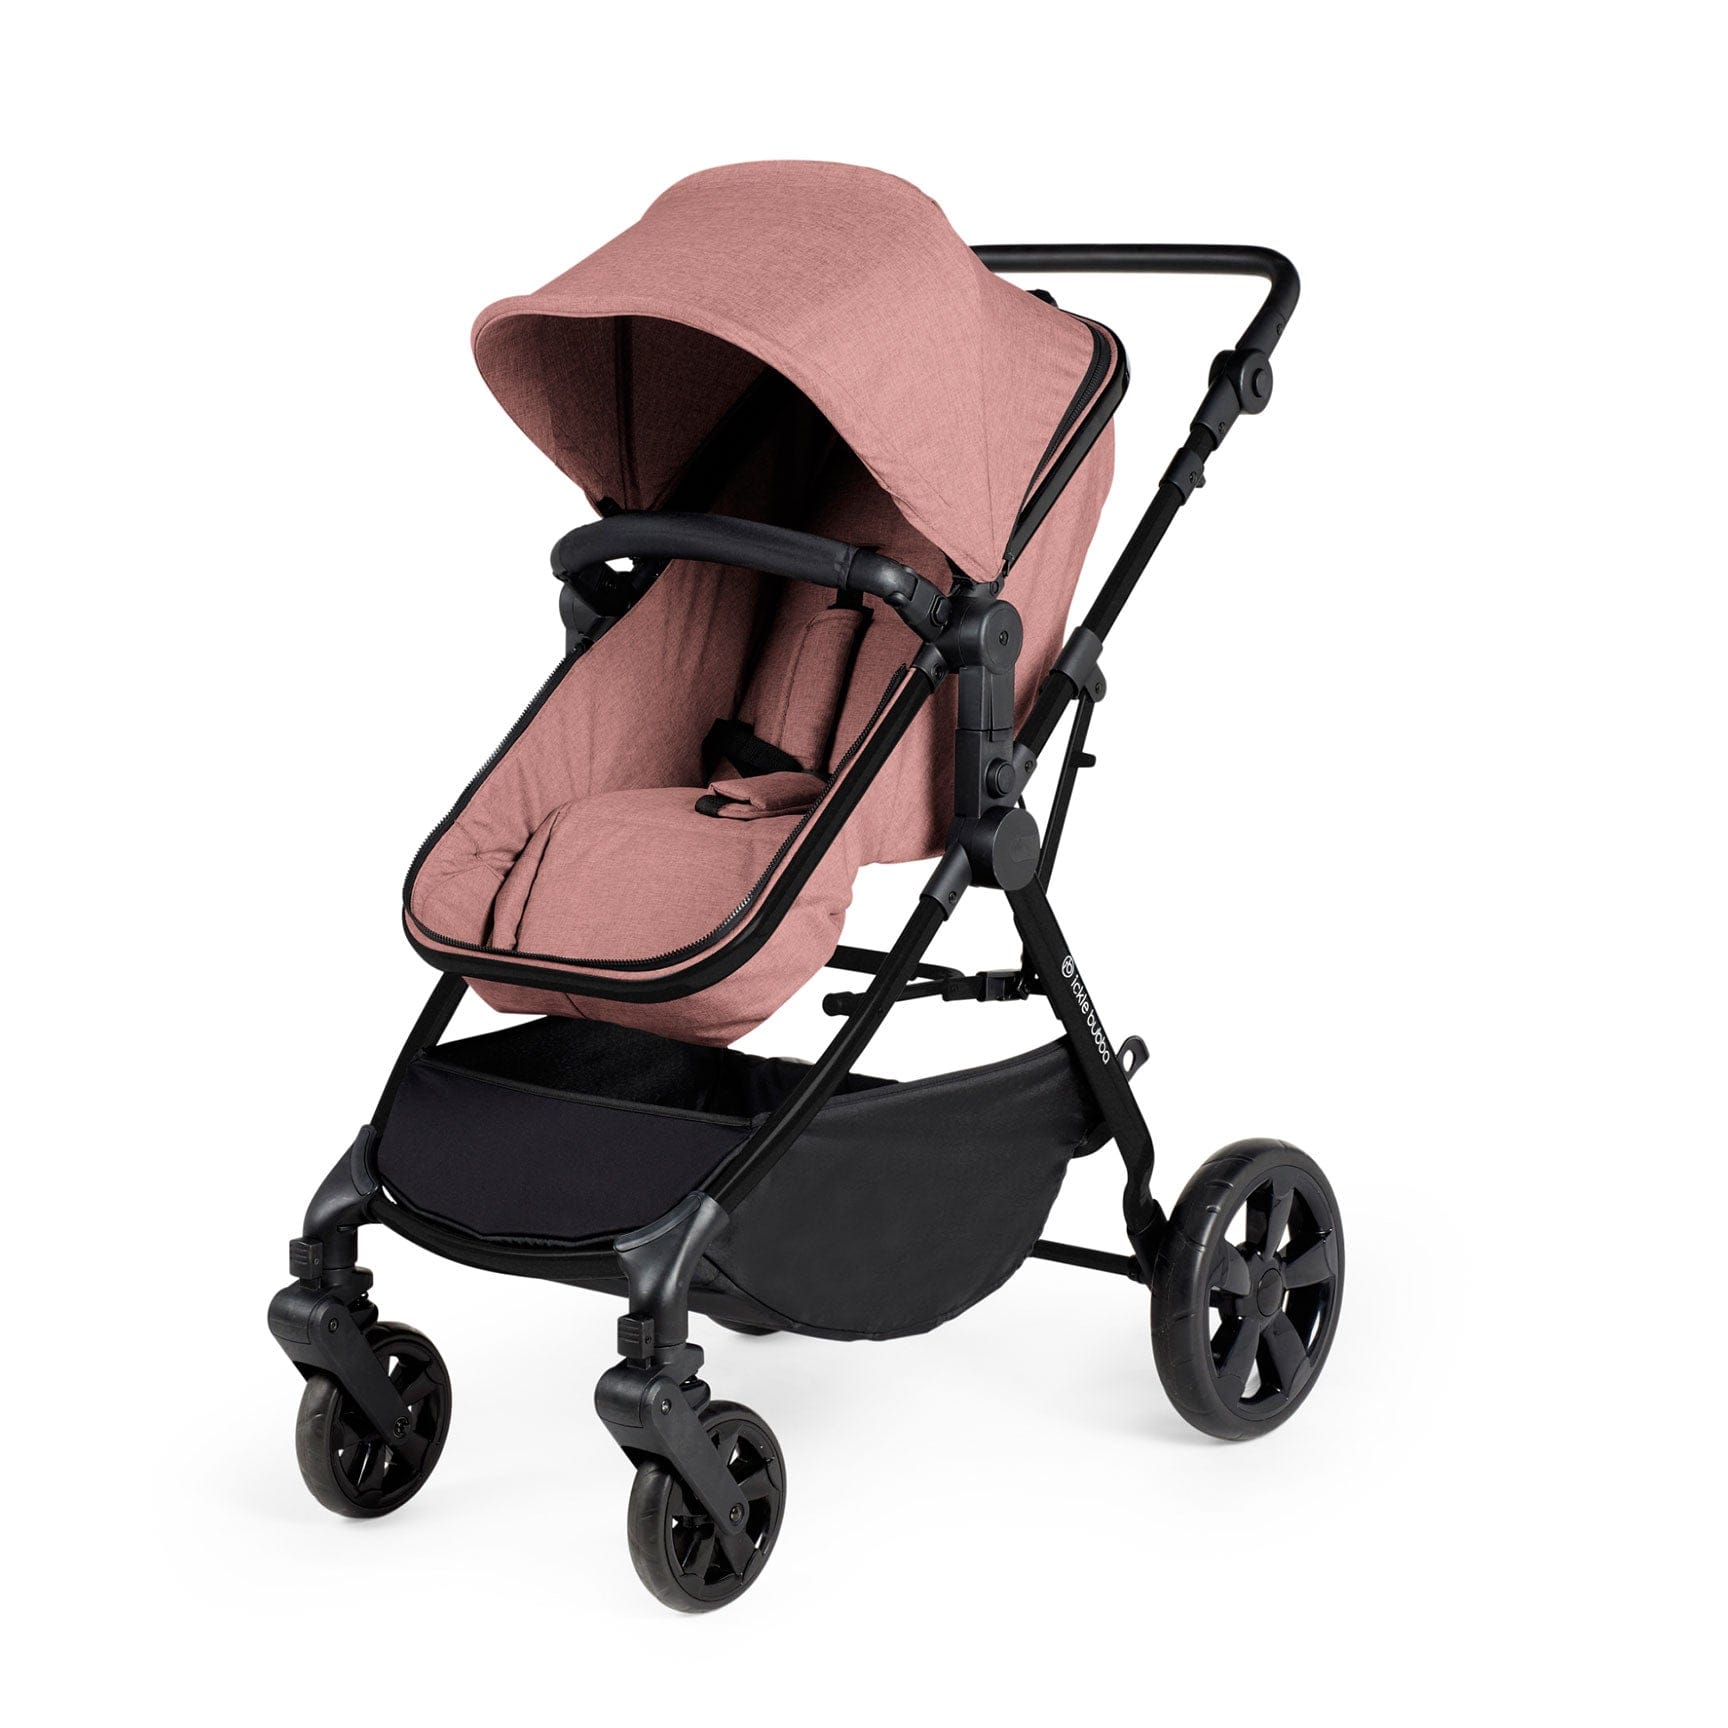 Ickle Bubba Comet 3-in-1 Travel System with Astral Car Seat in Dusty Pink Baby Prams 10-008-101-134 5056515025774